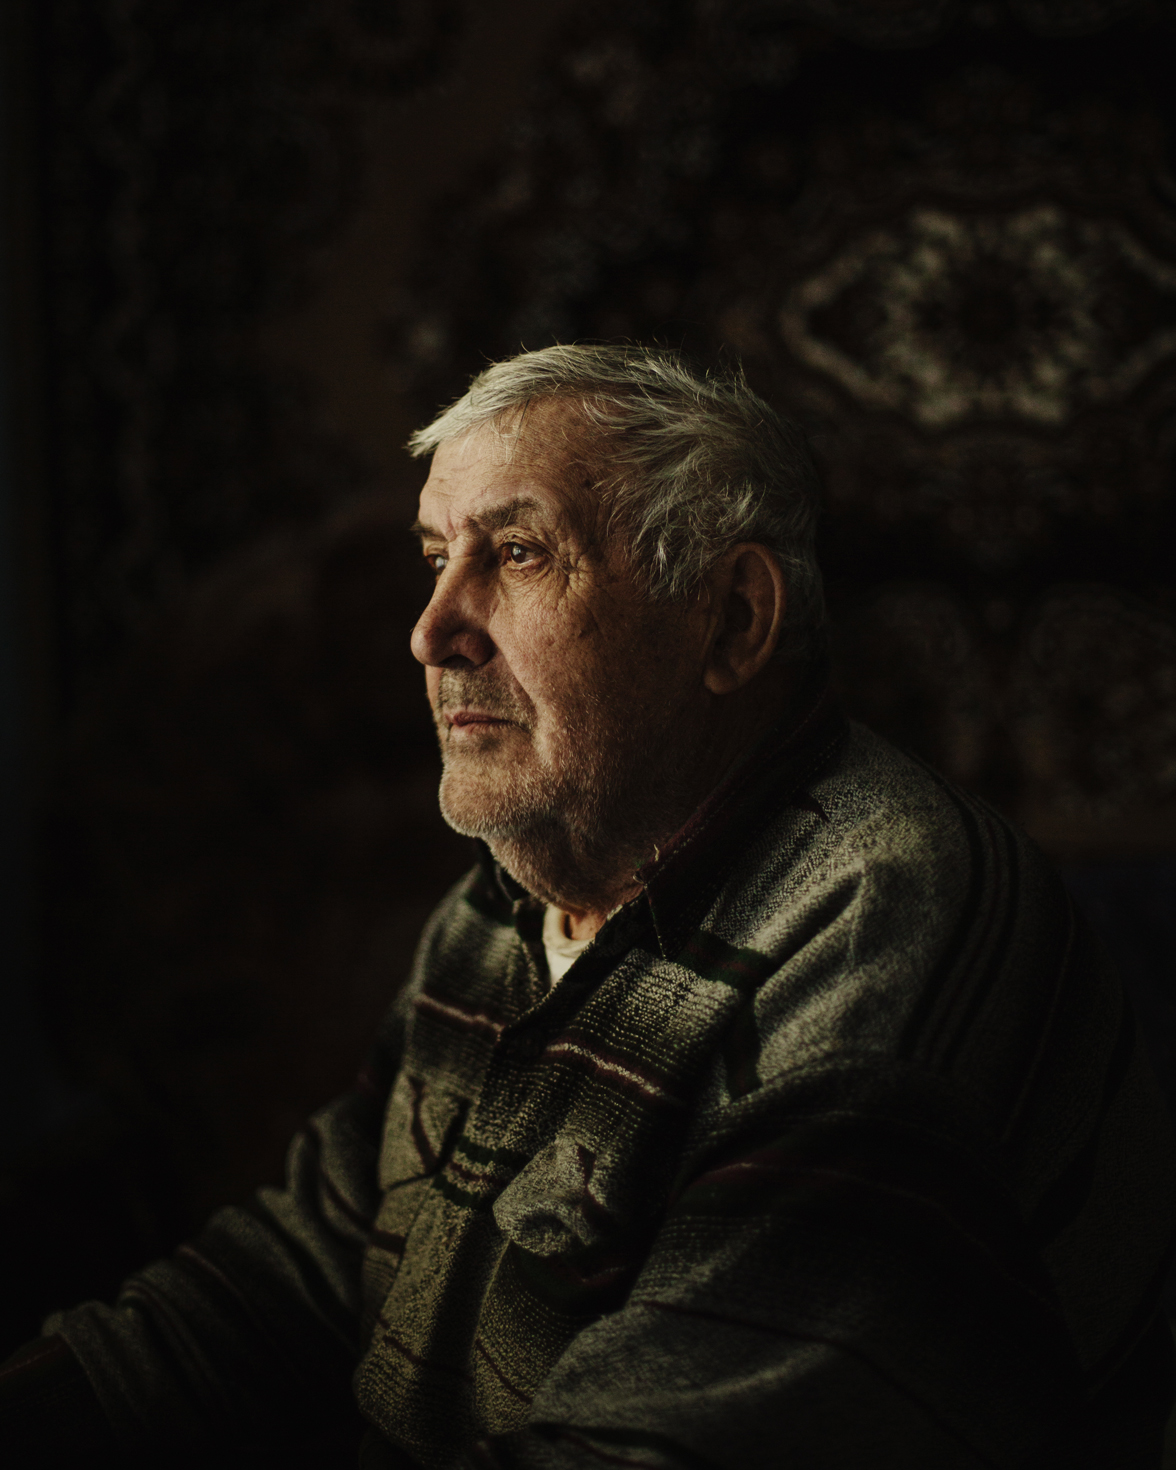  Avdarma - Ivan Vladimirovic Angelov is 80 years old, he’s a survivor from the 1946 famin, he was considered dead until being saved by his aunt. 